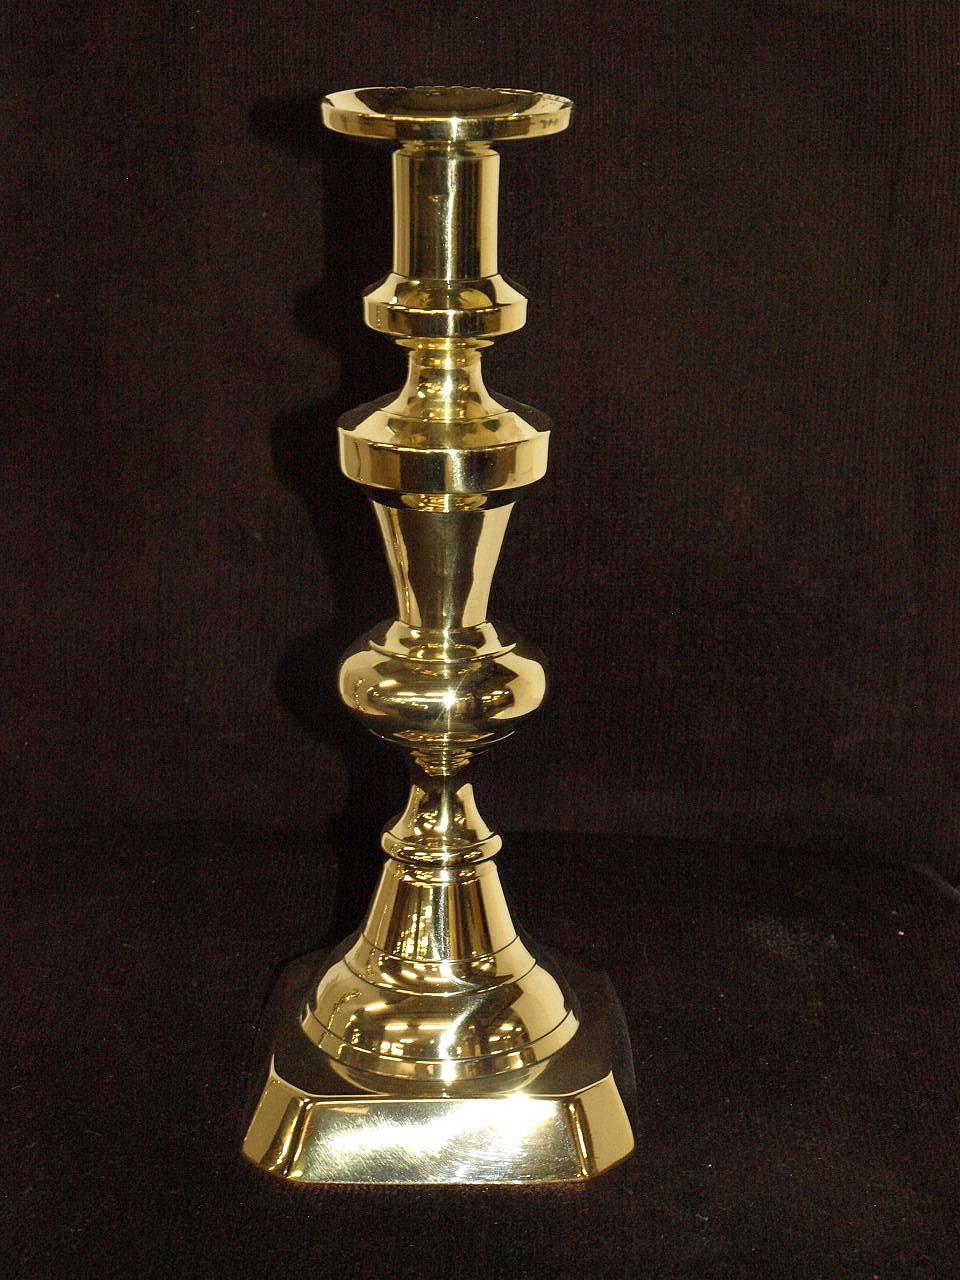 Pair of English Victorian brass candlesticks, with nice shape and good weight, minor wear to one rim.